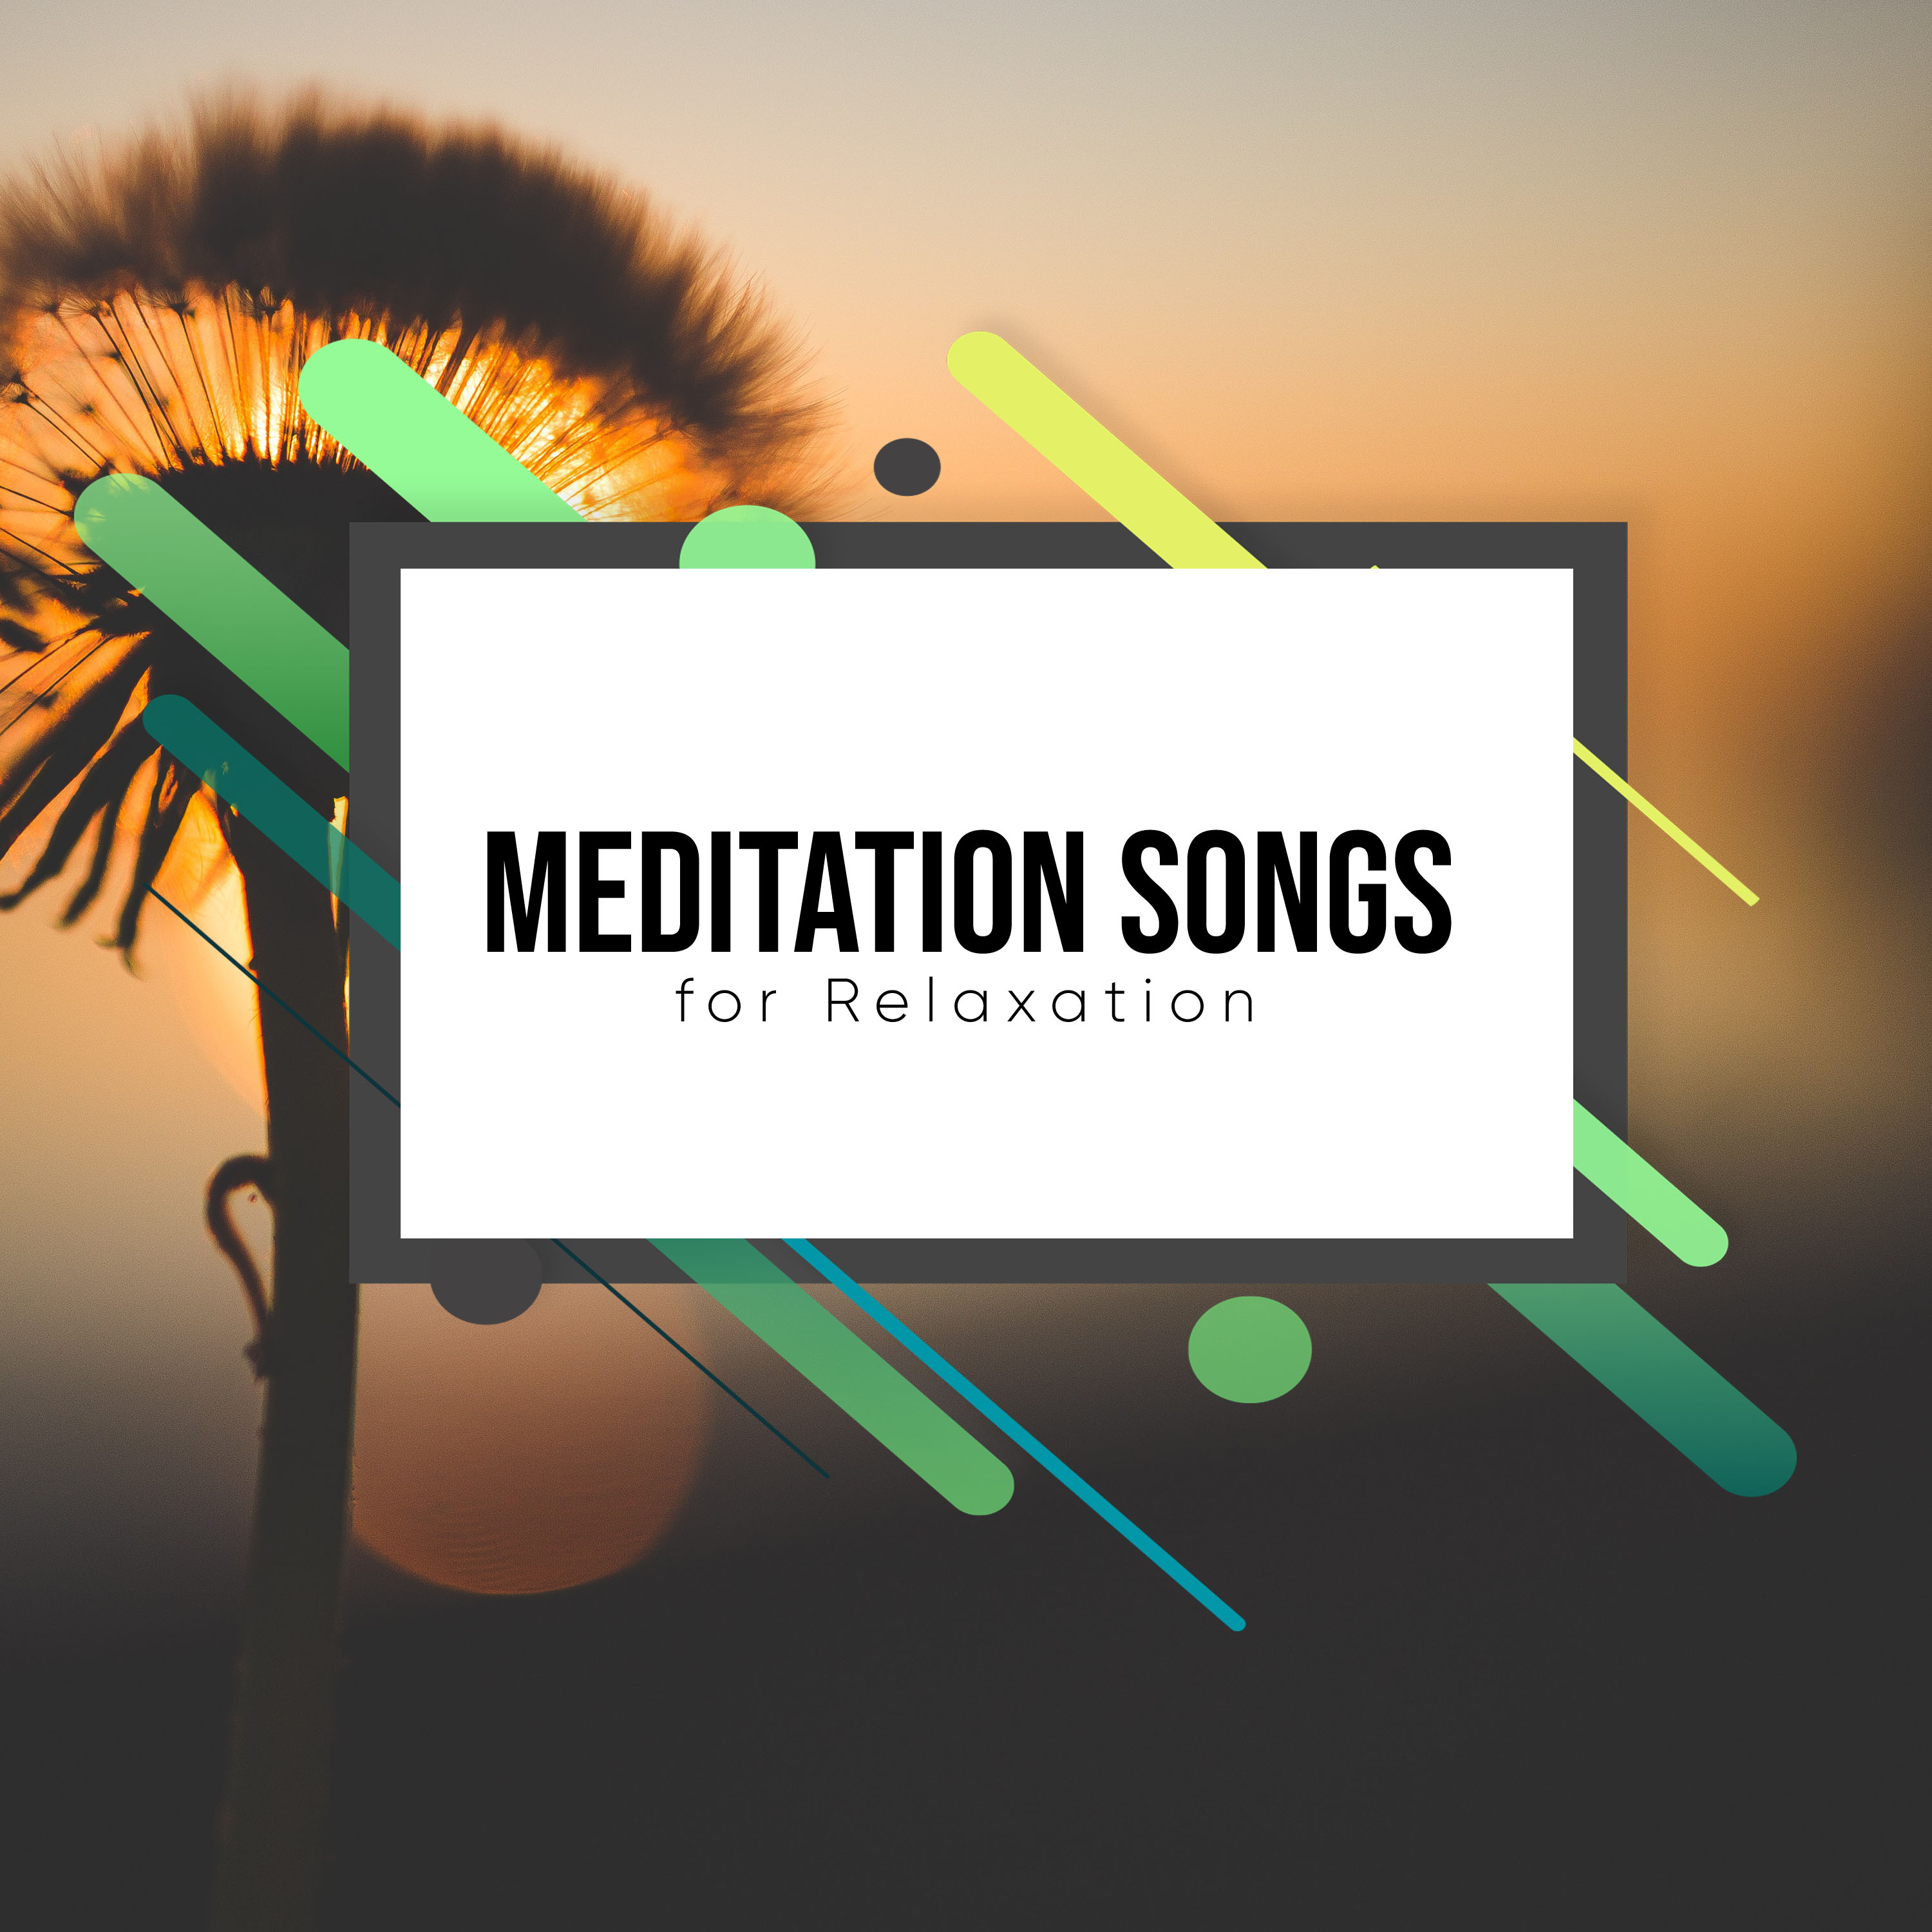 #13 Asian Meditation Songs for Relaxation Therapy